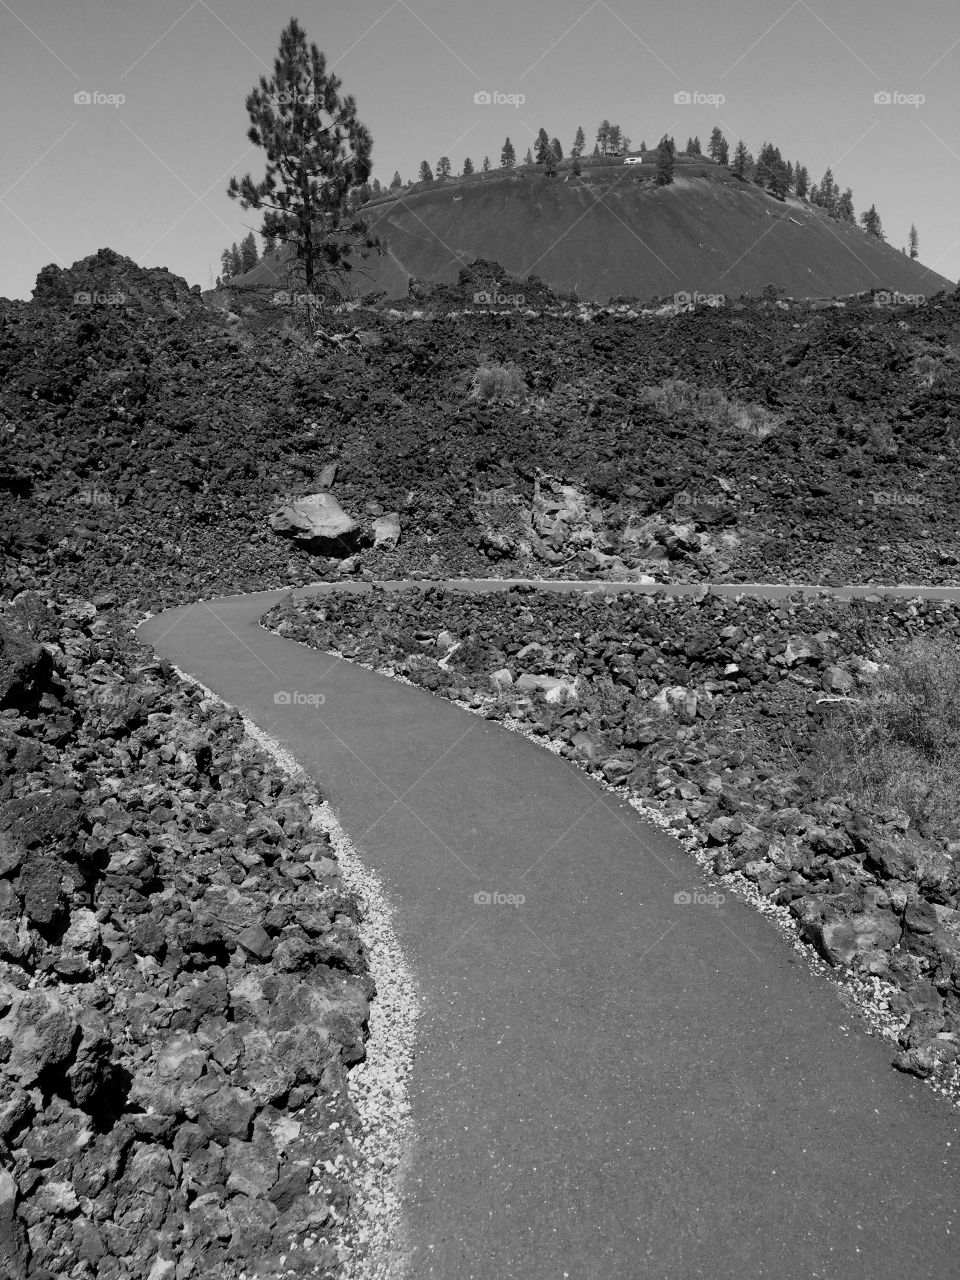 Path to the cinder cone